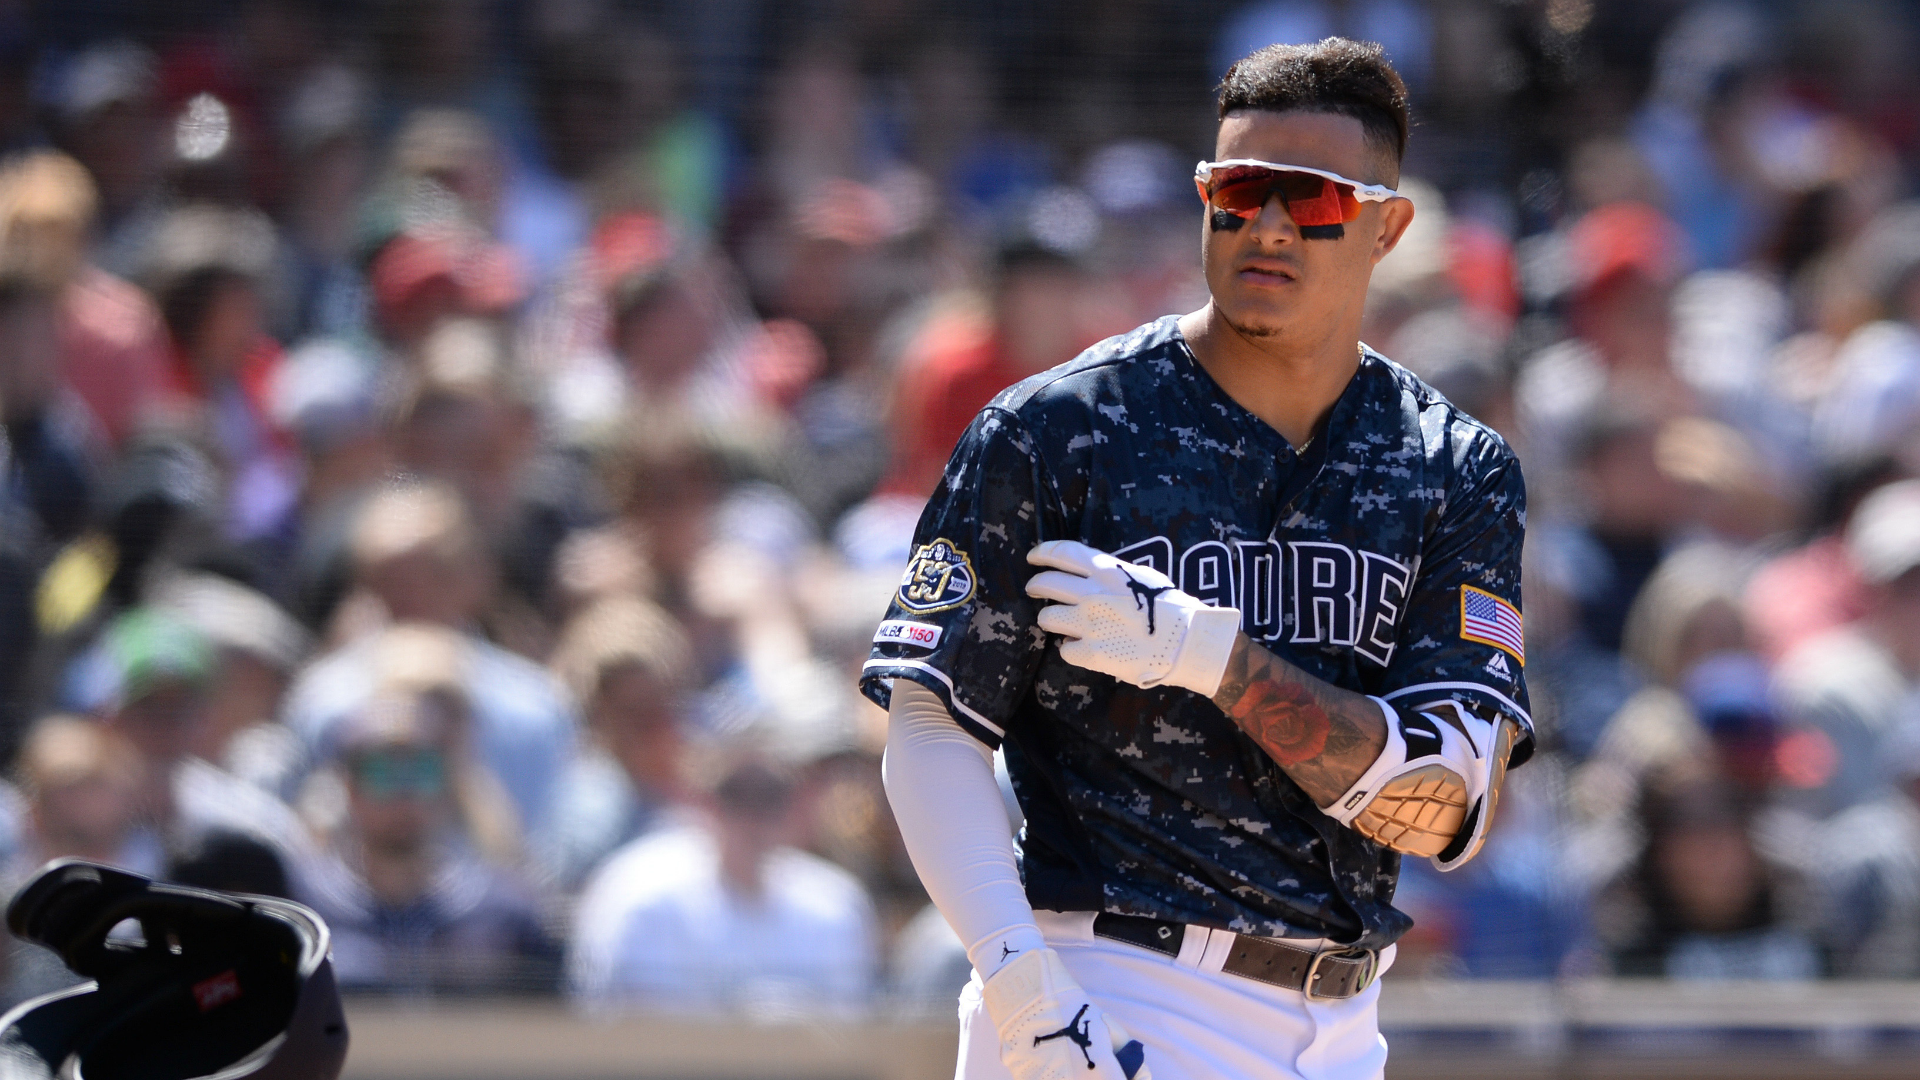 For Manny Machado, everything is sunny in San Diego